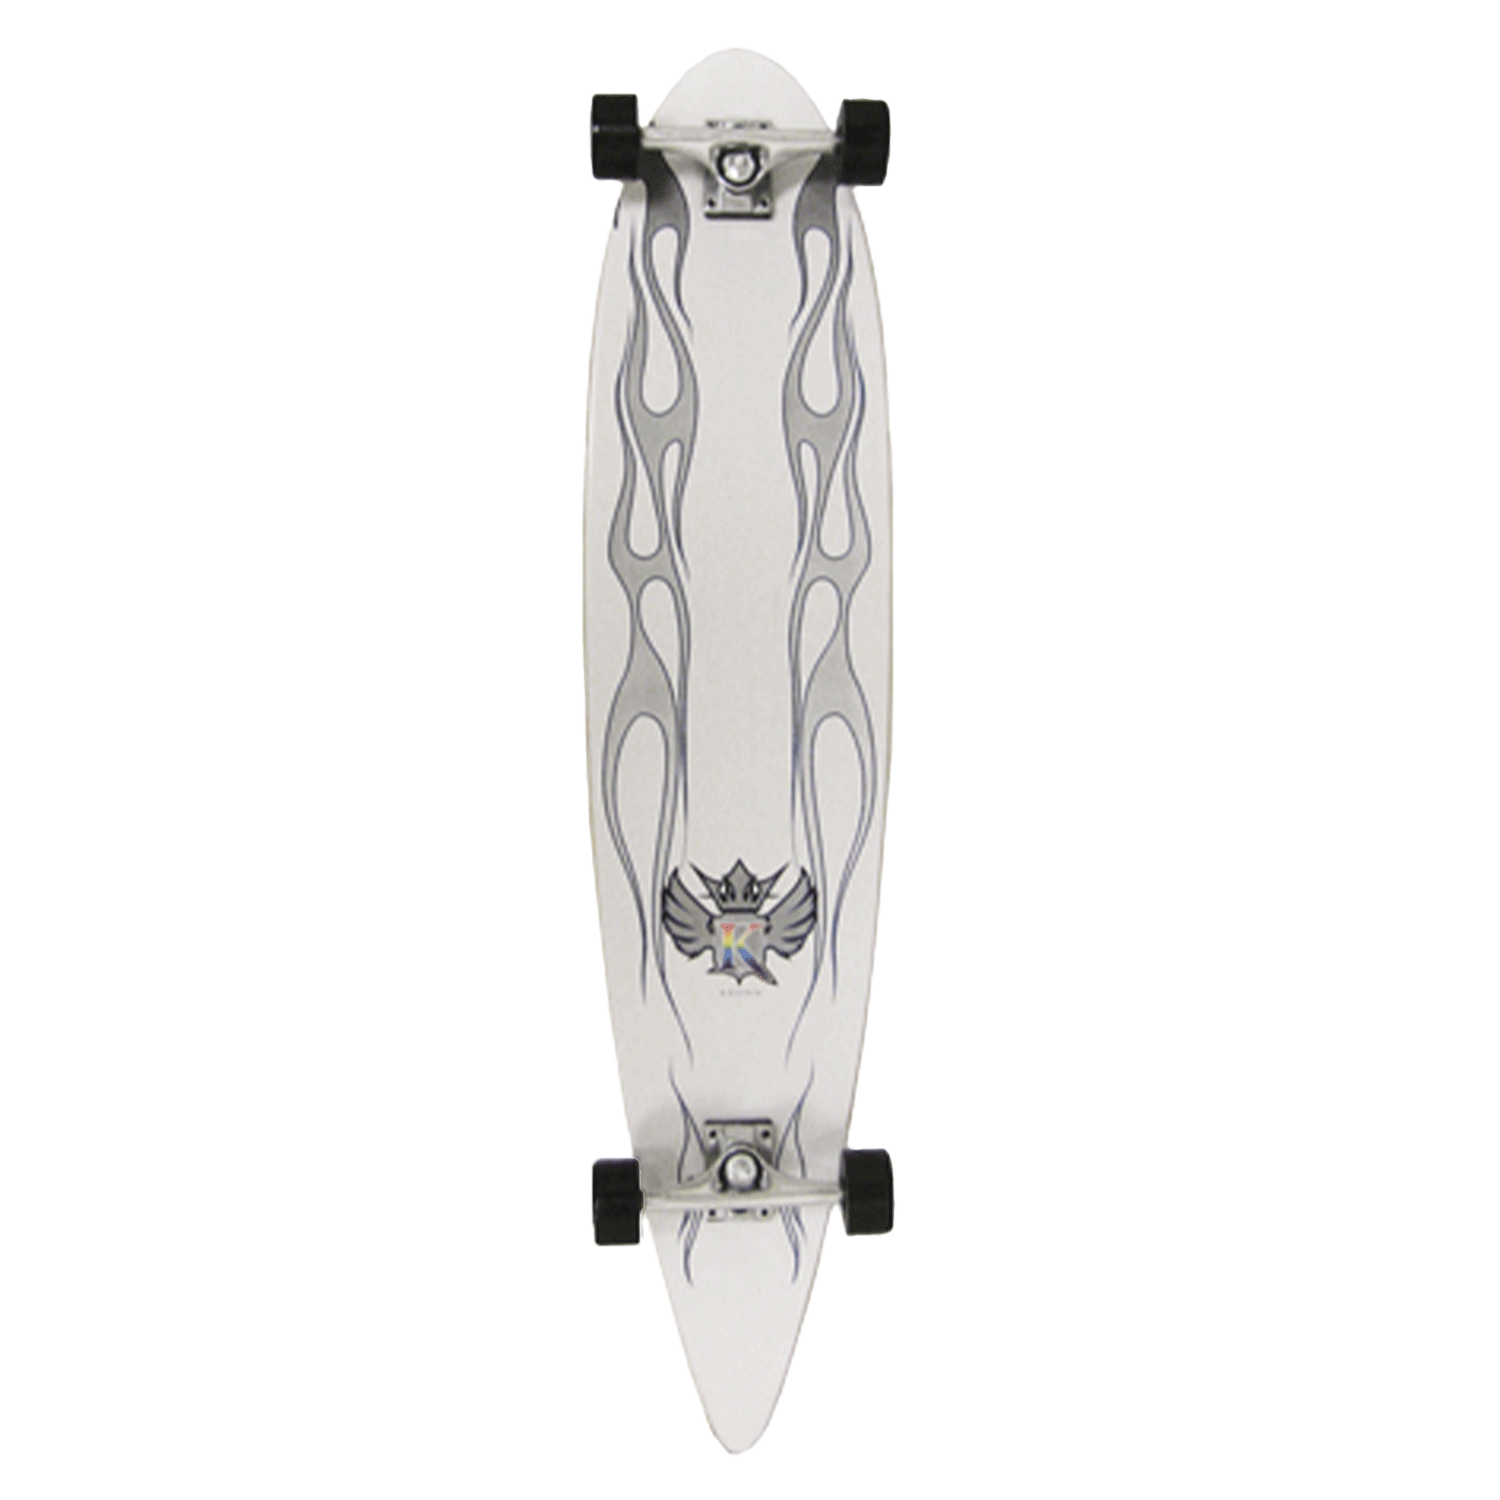 Krown Longboard Complete Pintail Classic White 9in x 43in